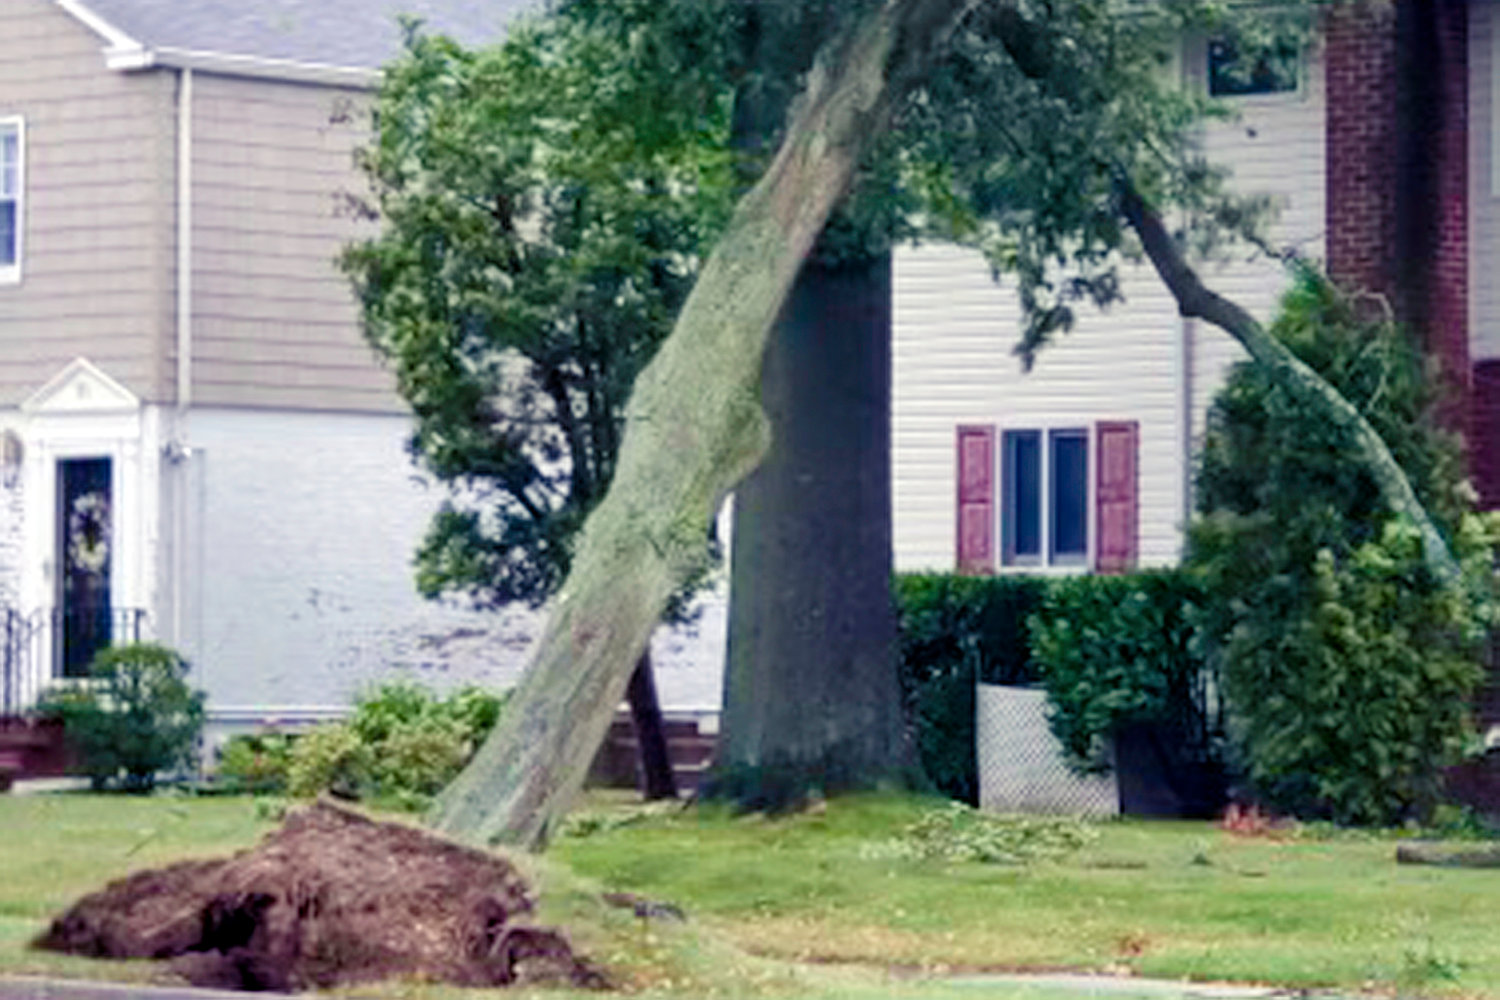 This Aug. 4, 2020, photo provided by James Burke shows an uprooted tree that caused severe damage to a Garden City, N.Y., home during Tropical Storm Isias. (James Burke via AP)